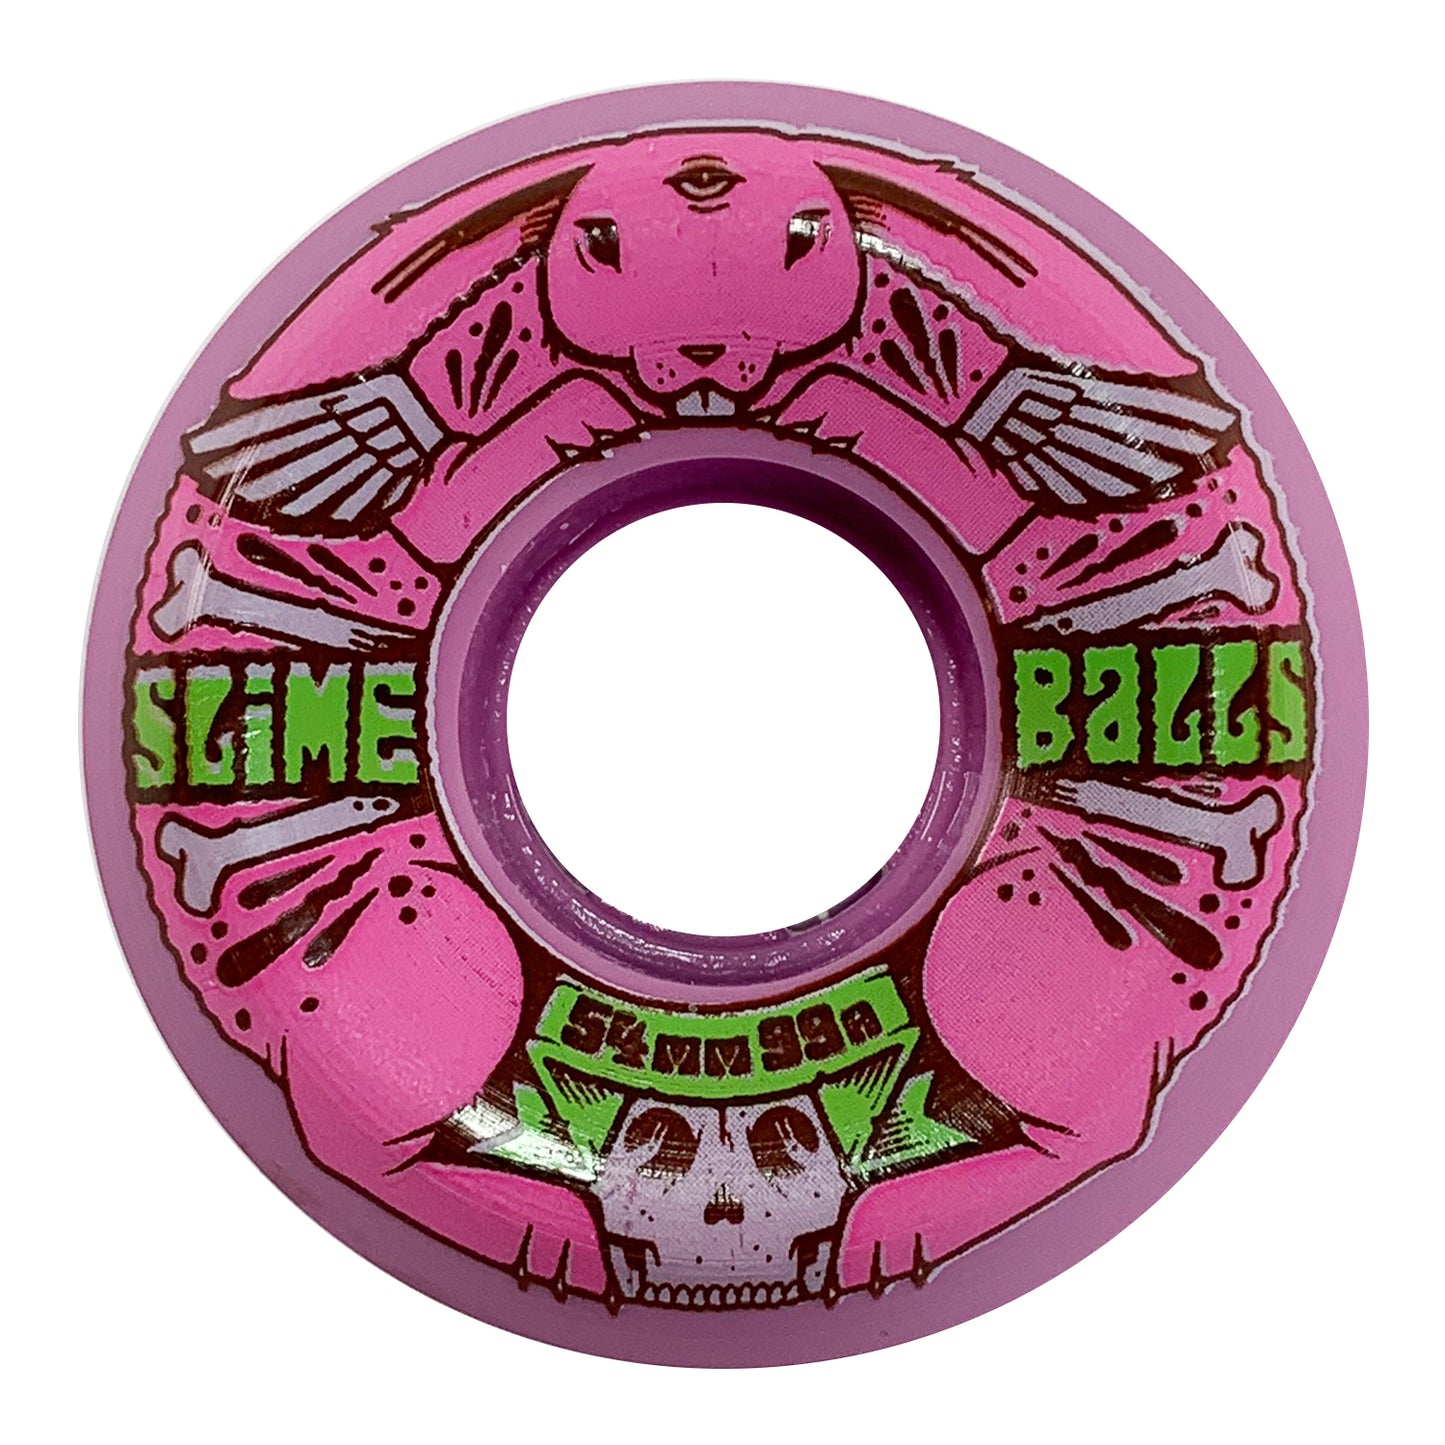 Slime Balls - 54mm - 99a J. Fish Bunny Speed Balls - Pink - Prime Delux Store